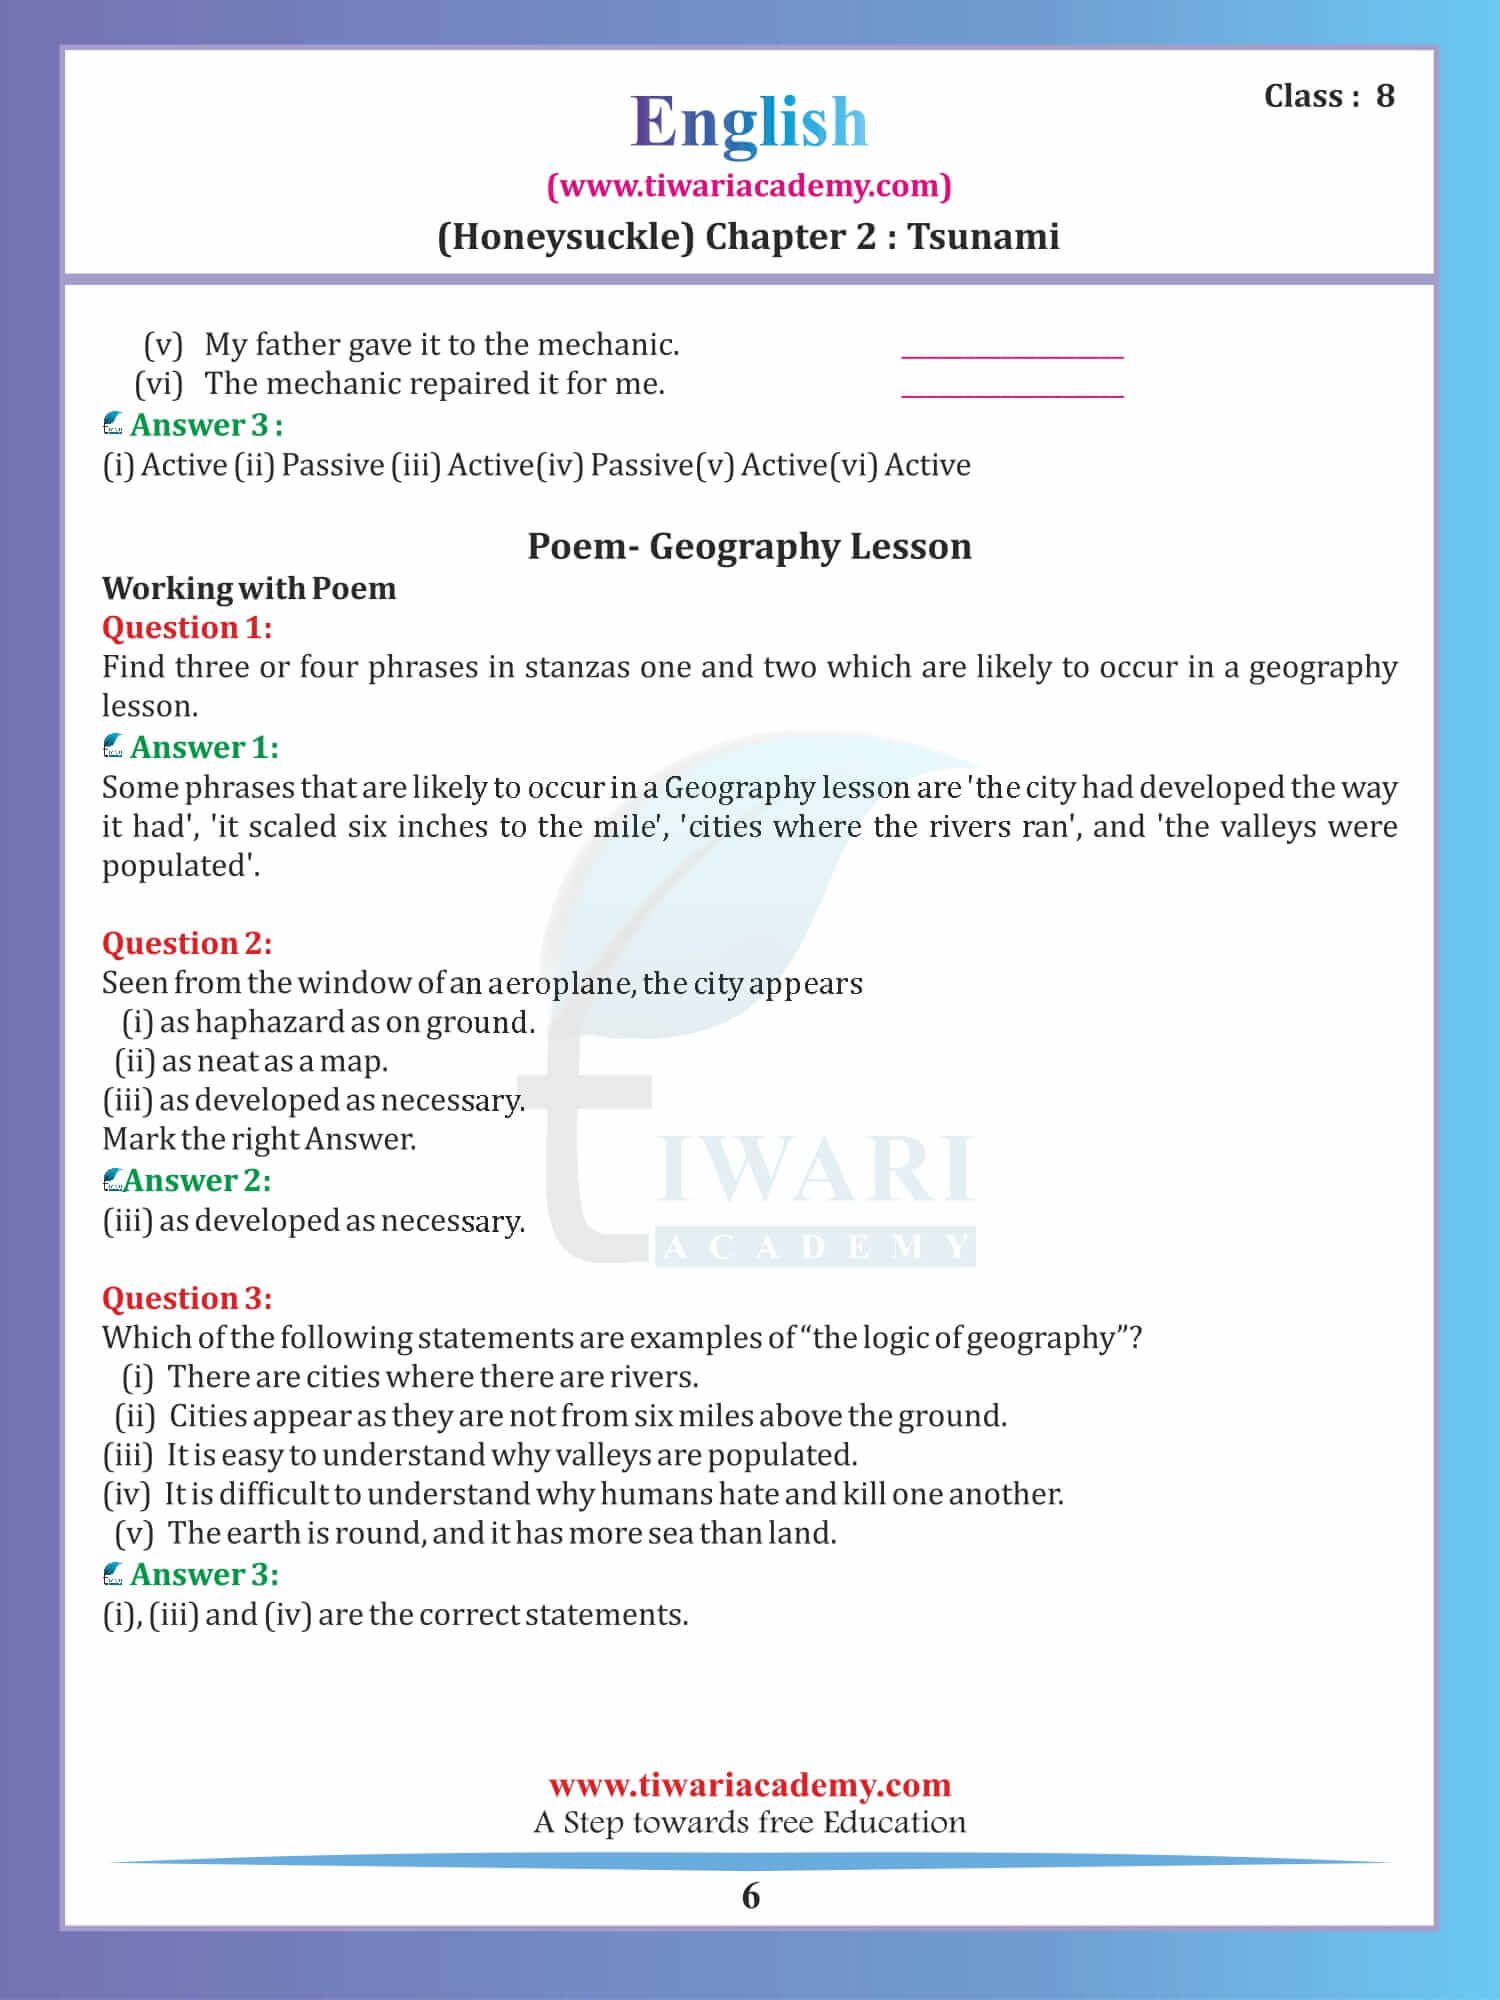 Class 8 English Honeydew Chapter 2 The Tsunami and the poem 2 pdf